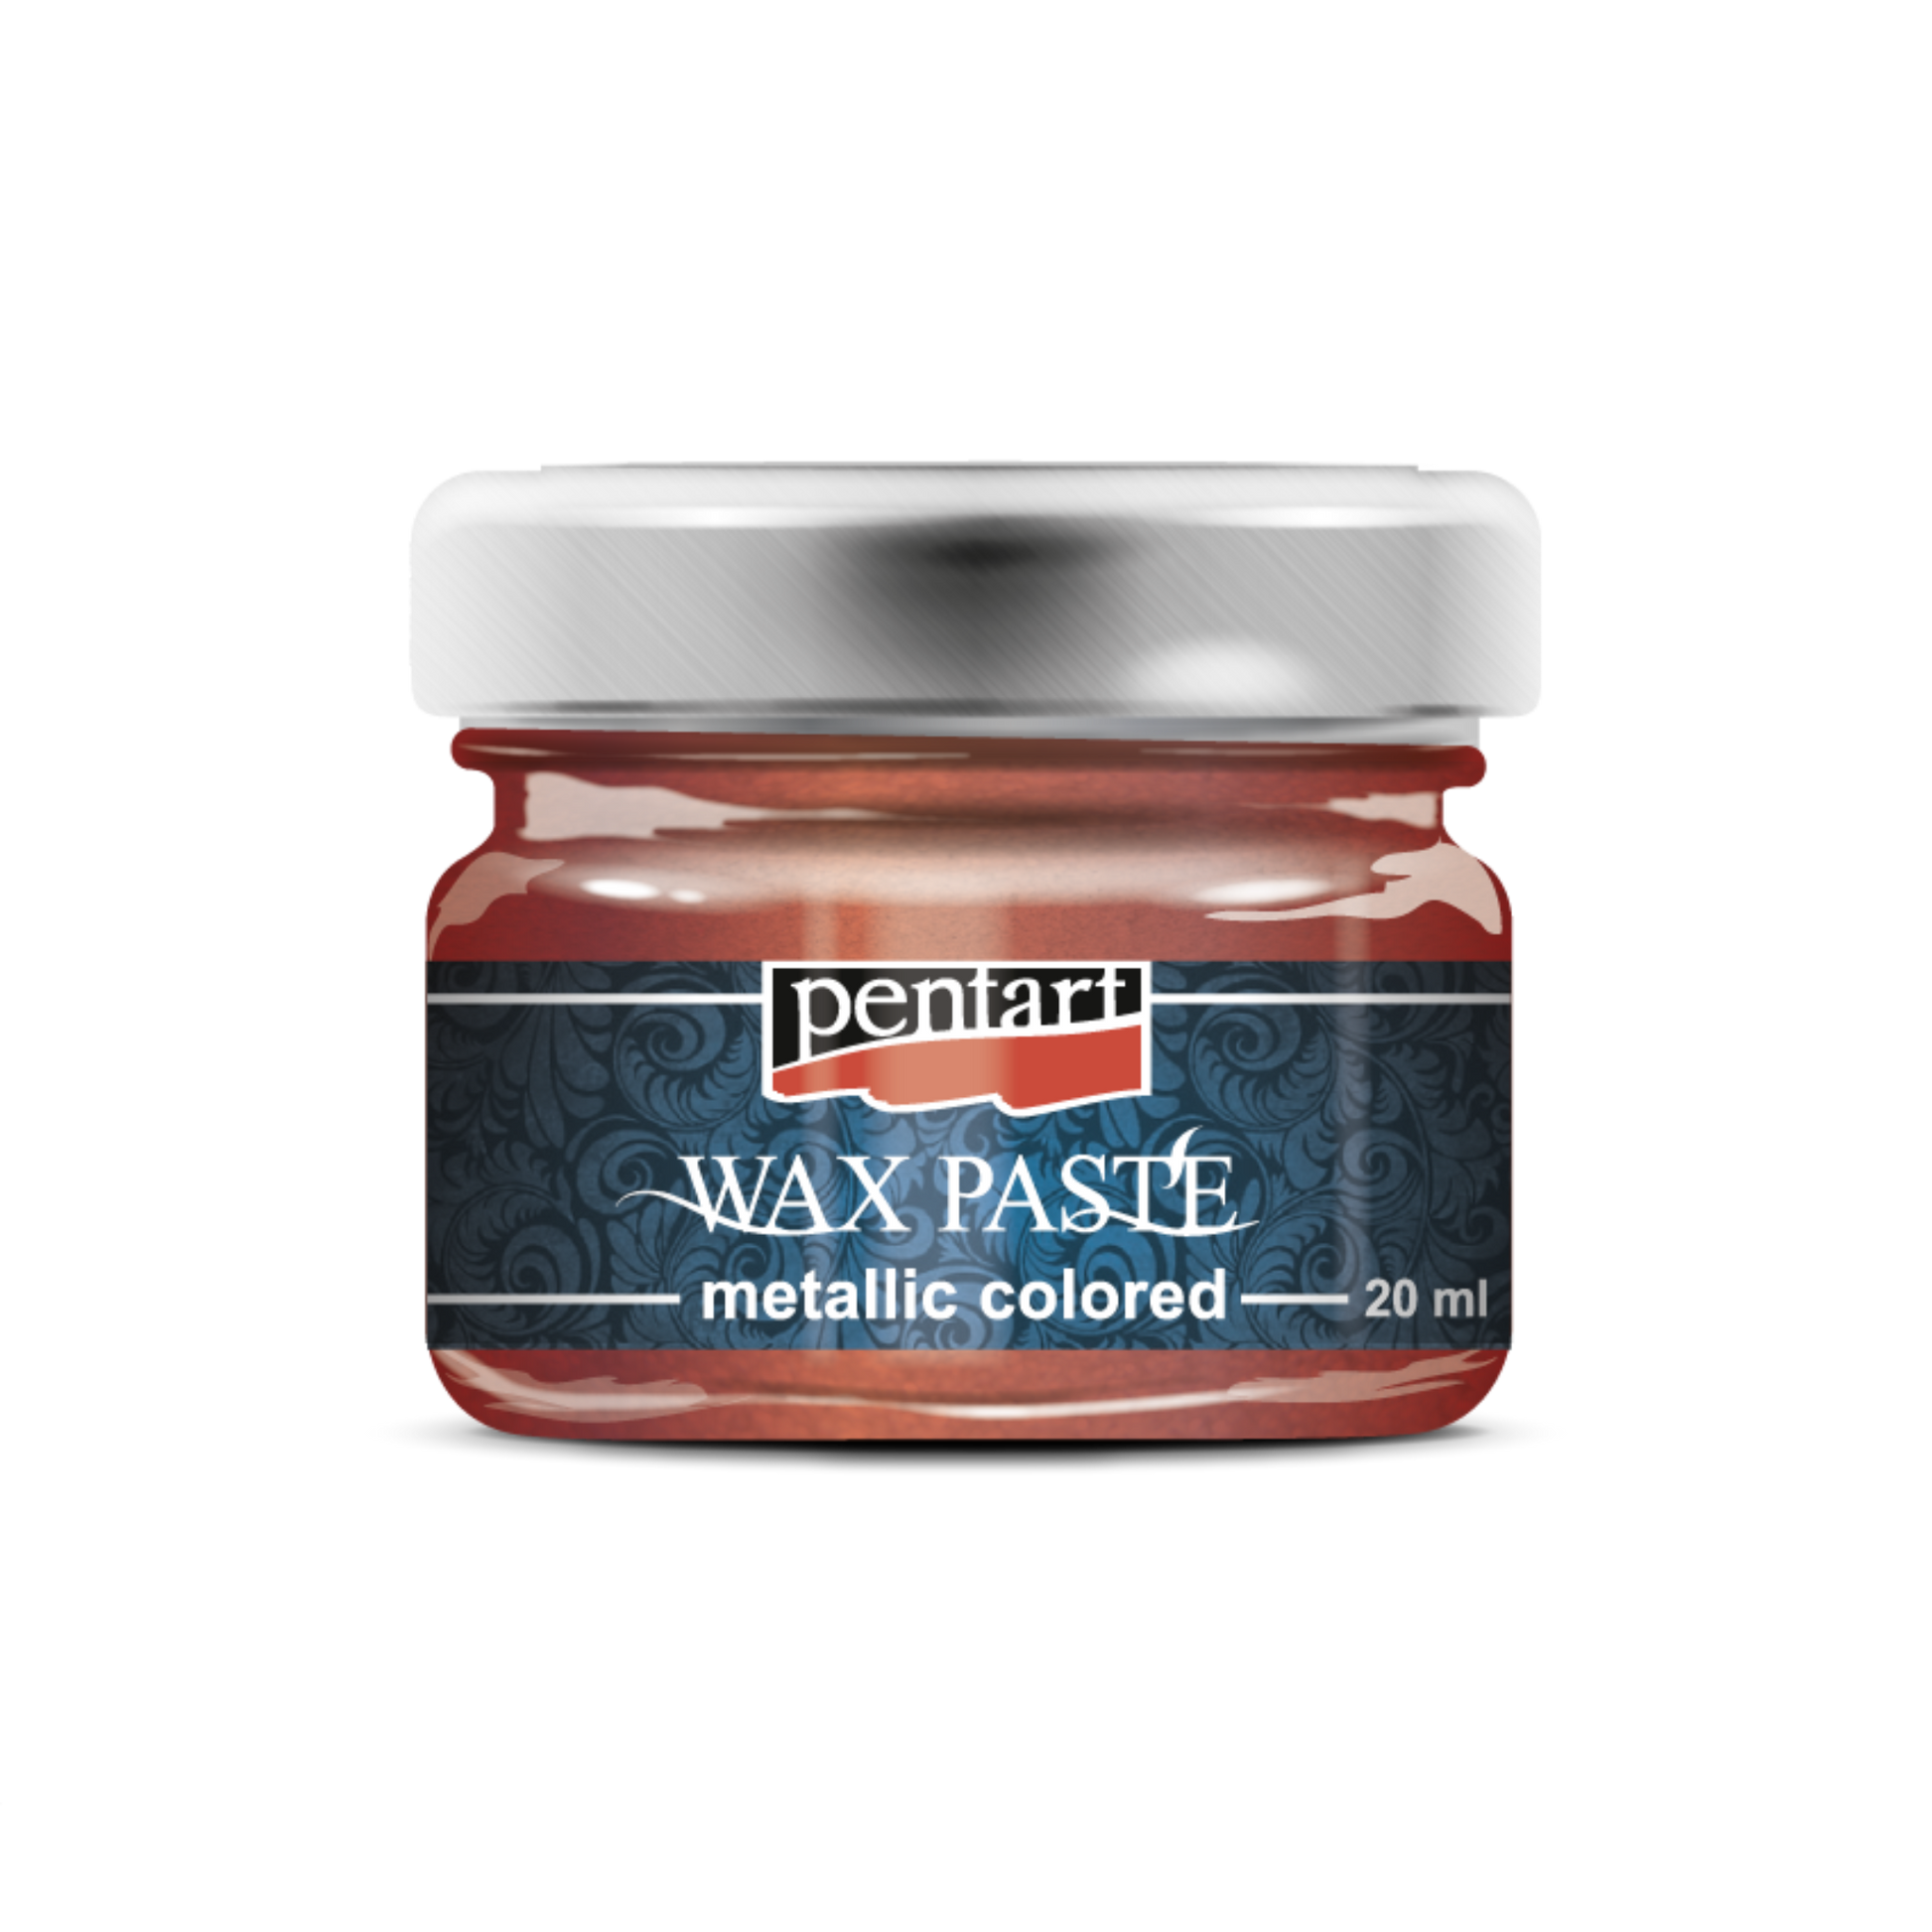 Wax Paste -"Metallic Red" by Pentart available at Milton's Daughter